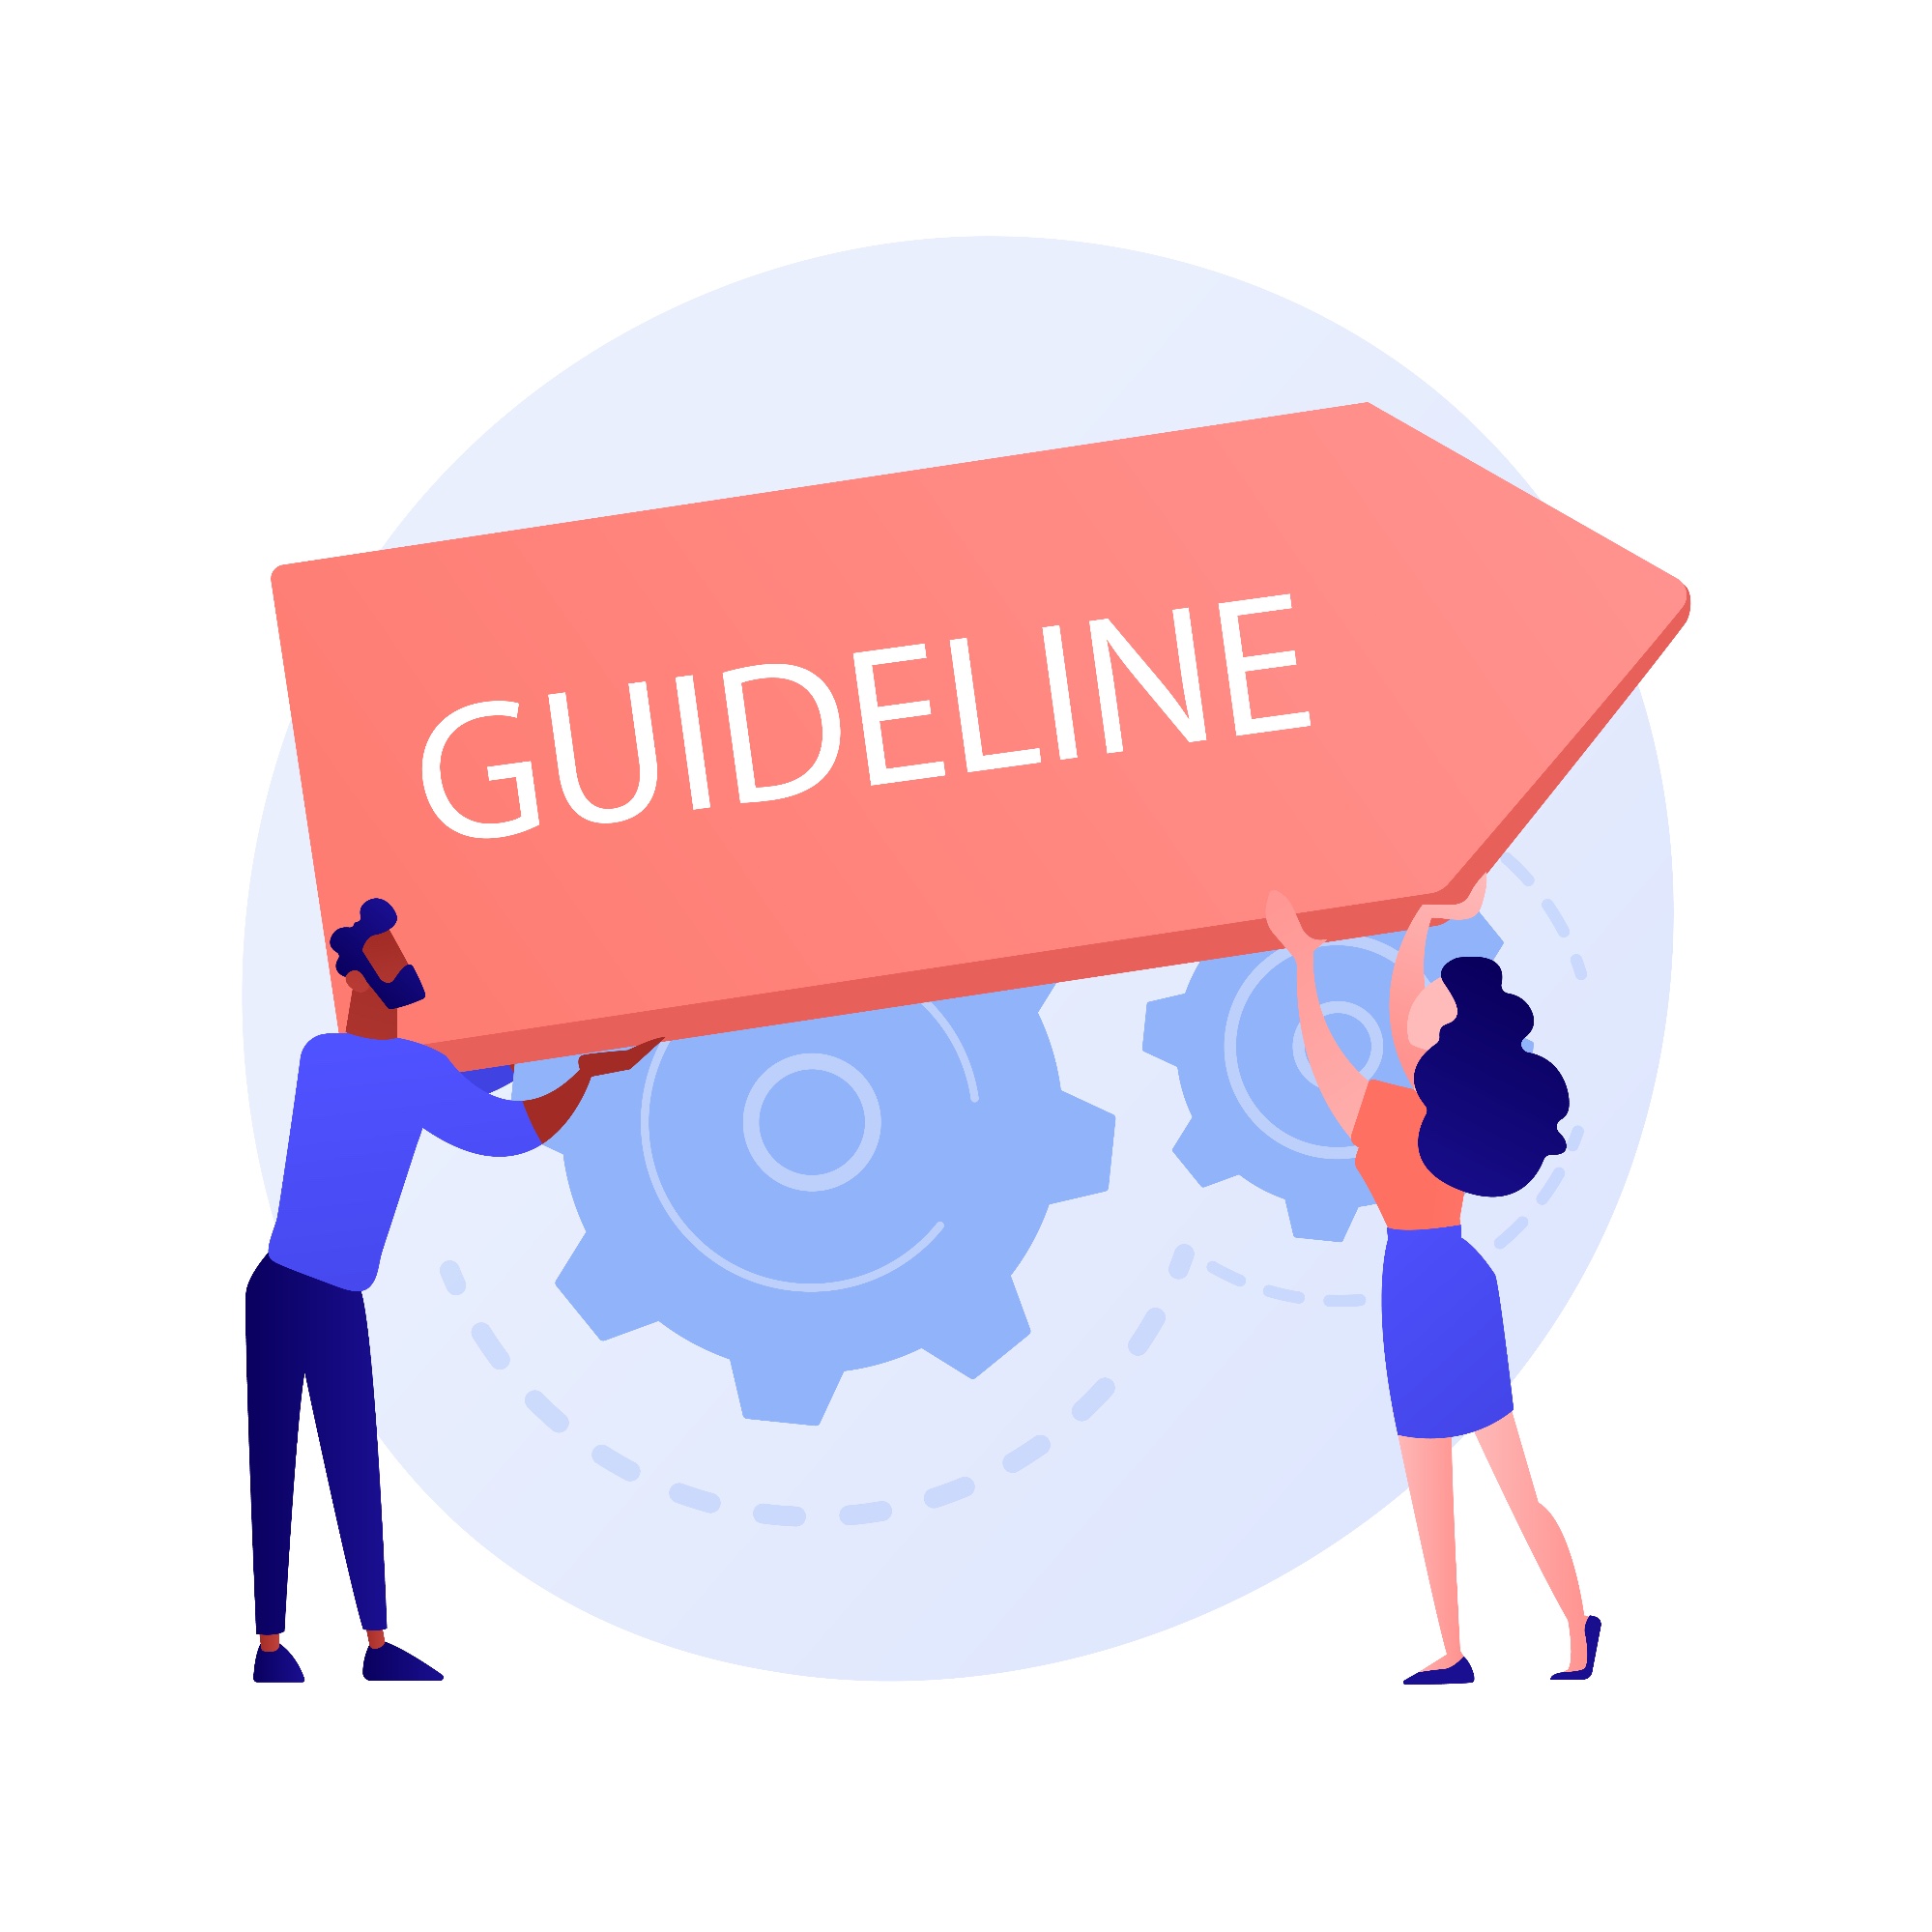 guideline-regulation-corporate-law-policy-company-specification-instruction-directive-rulebook-office-management-design-element-concept-illustration